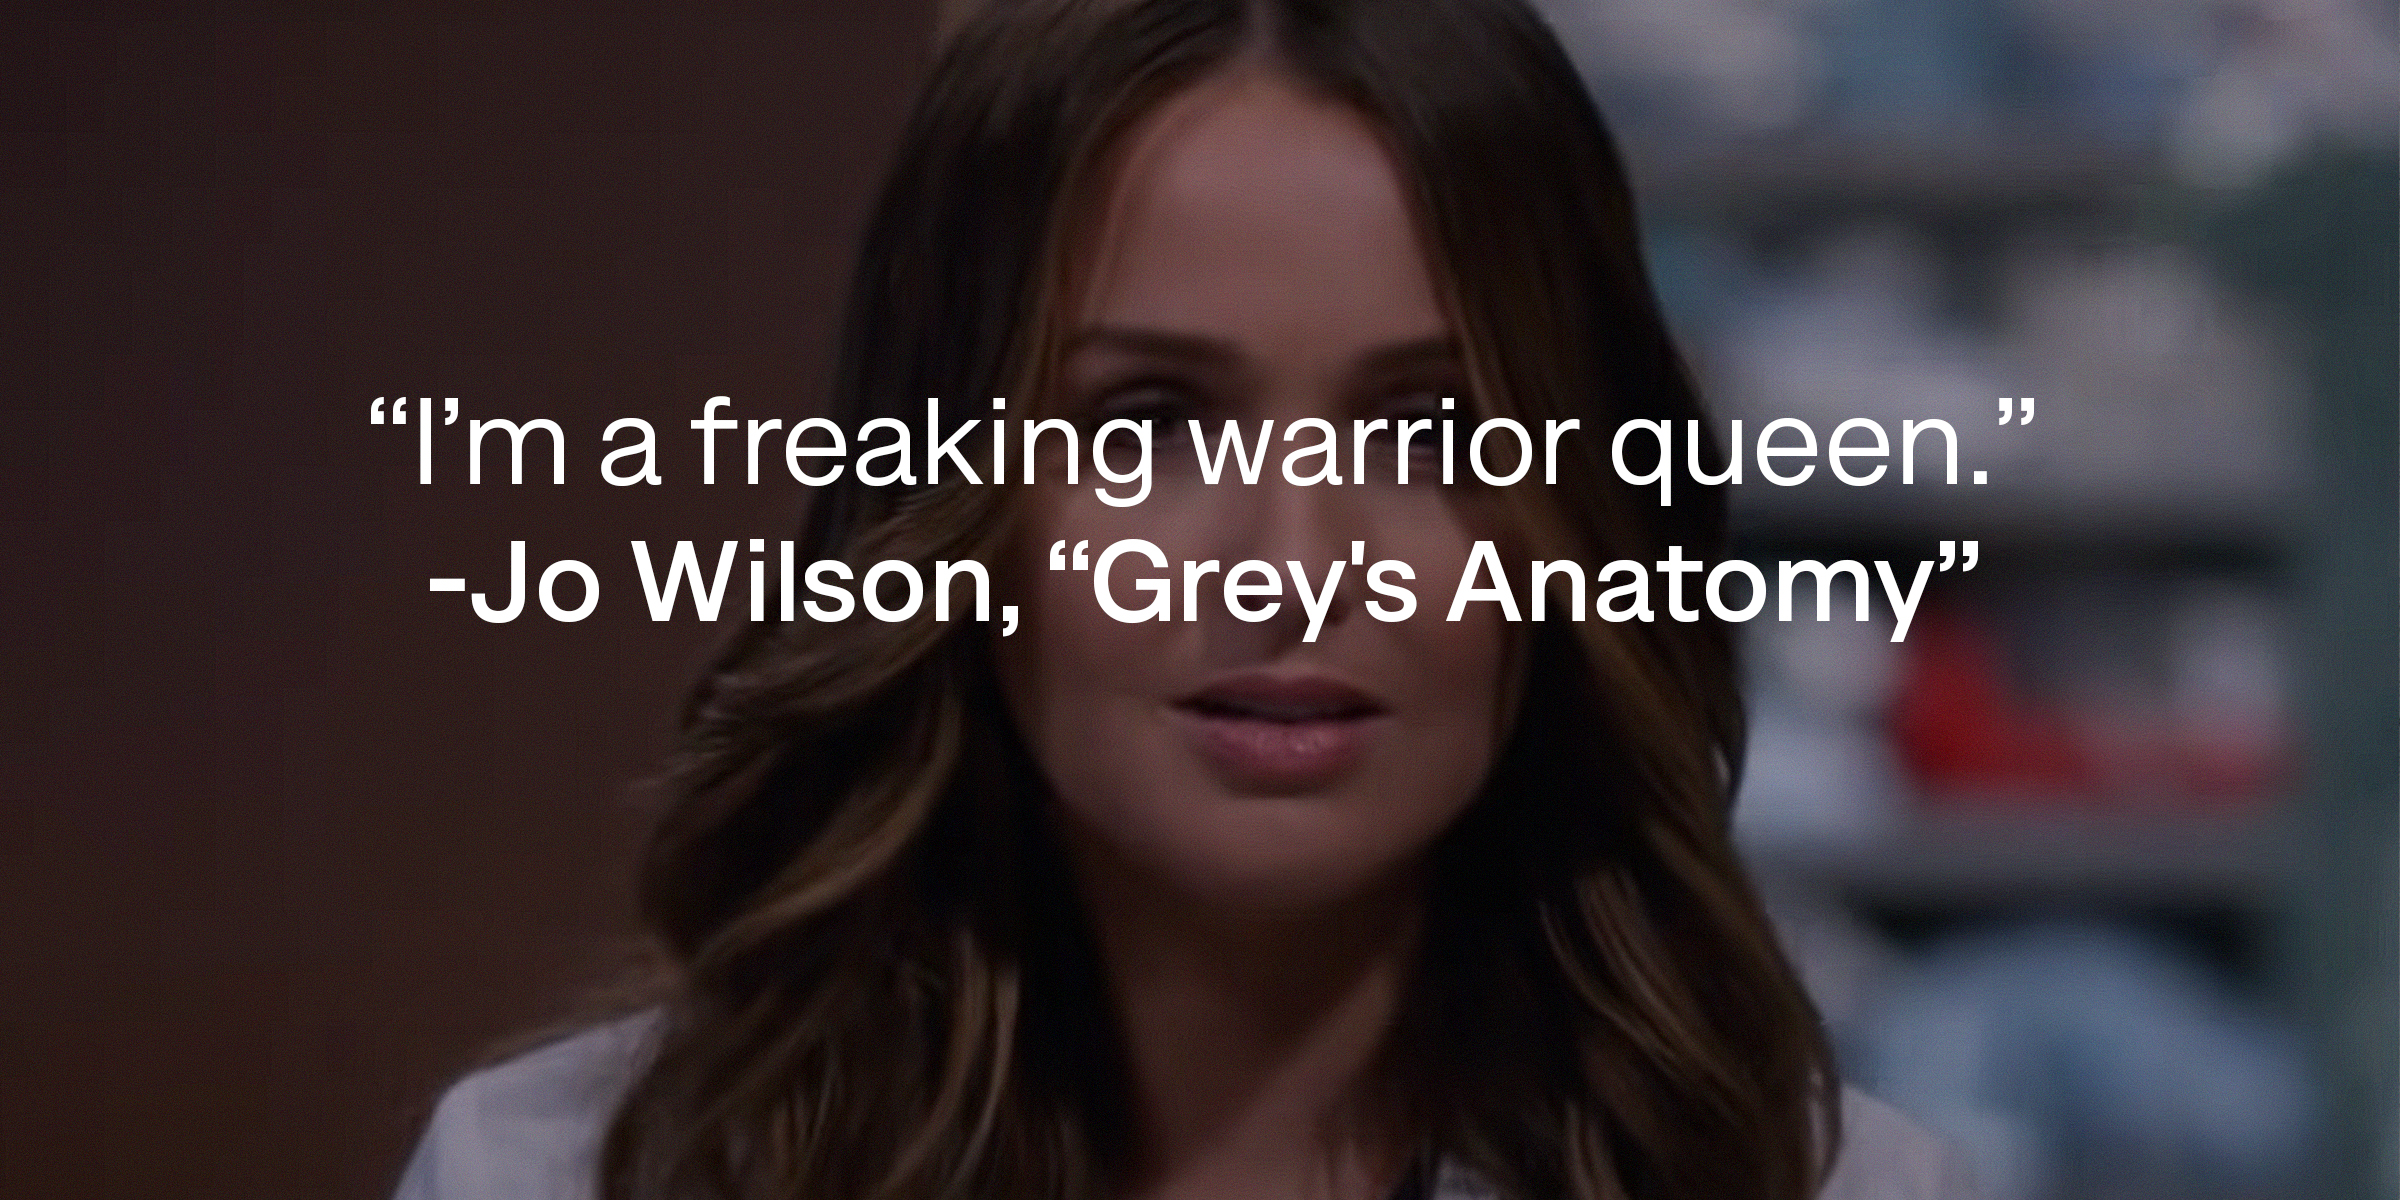 Jo Wilson's image with quote from "Grey's Anatomy": "I’m a freaking warrior queen." | Source: youtube.com/ABCNetwork